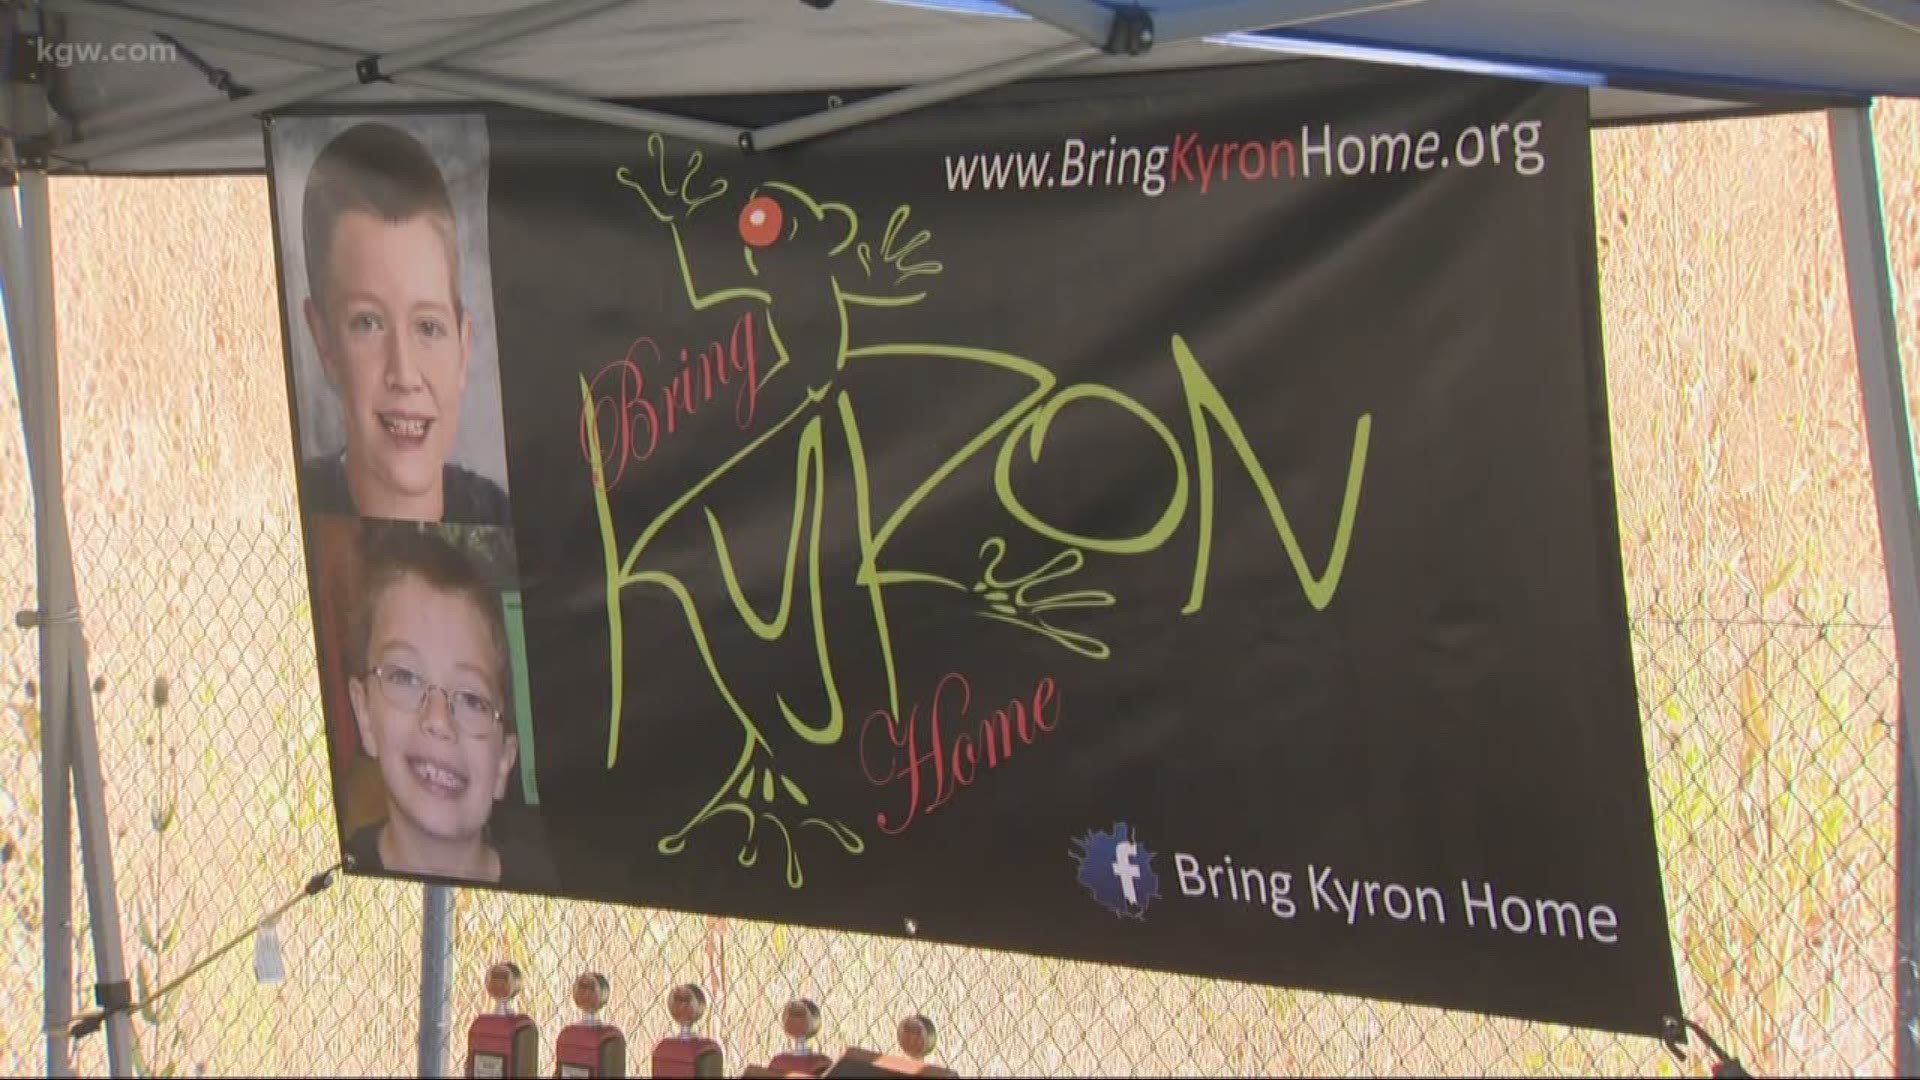 Sunday, hundreds of people came together for a special cause, to find Kyron Horman, who went missing in 2010